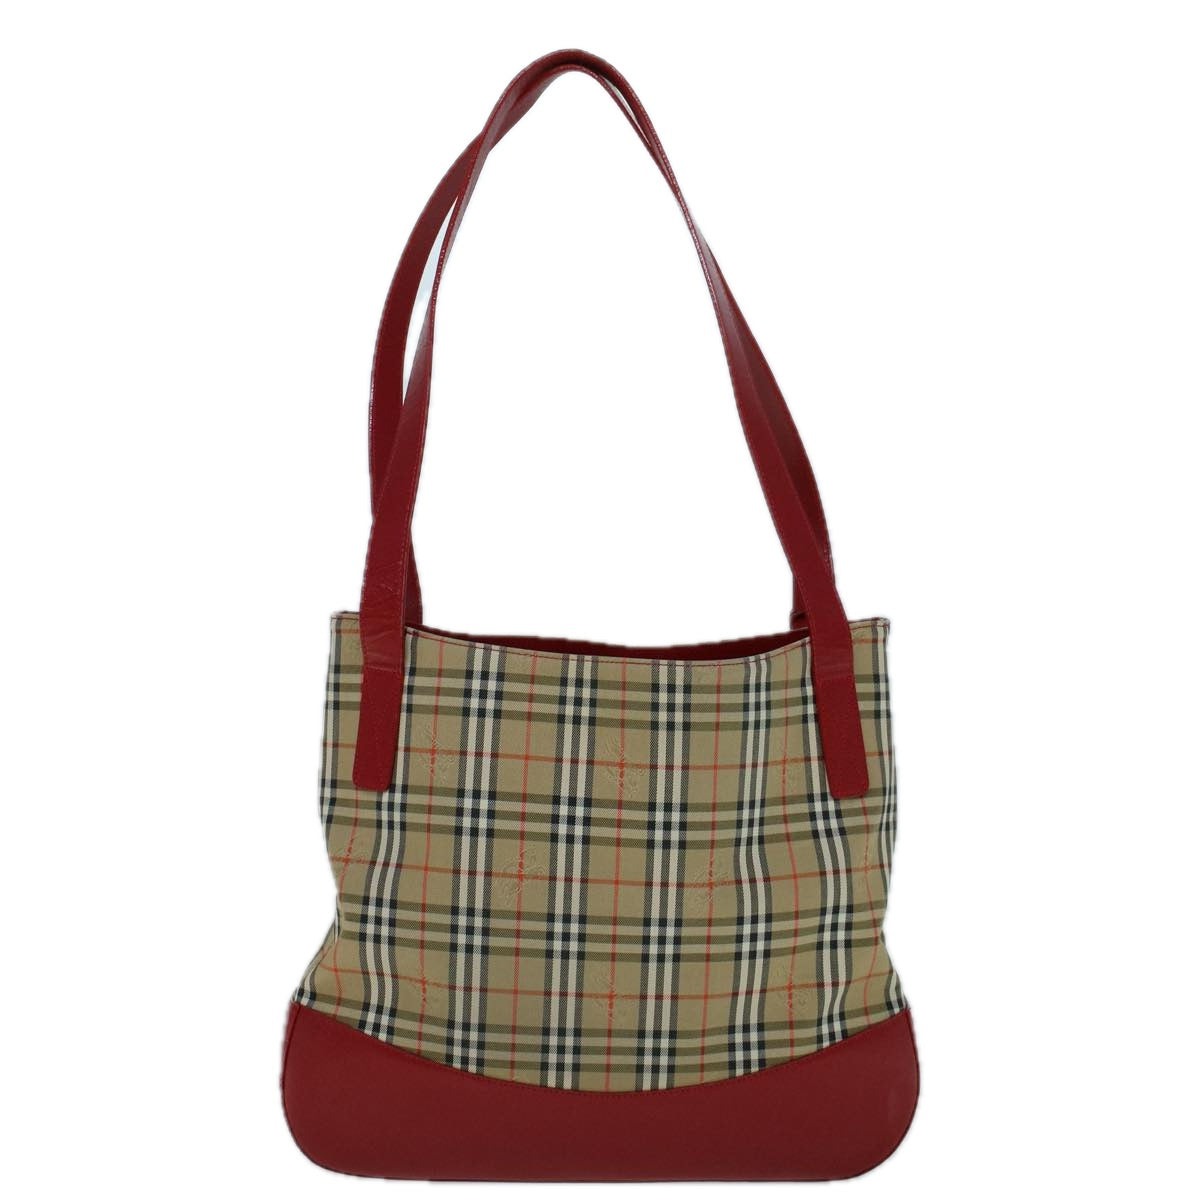 Burberrys Nova Check Tote Bag Canvas Beige Red Auth 56573 - 0